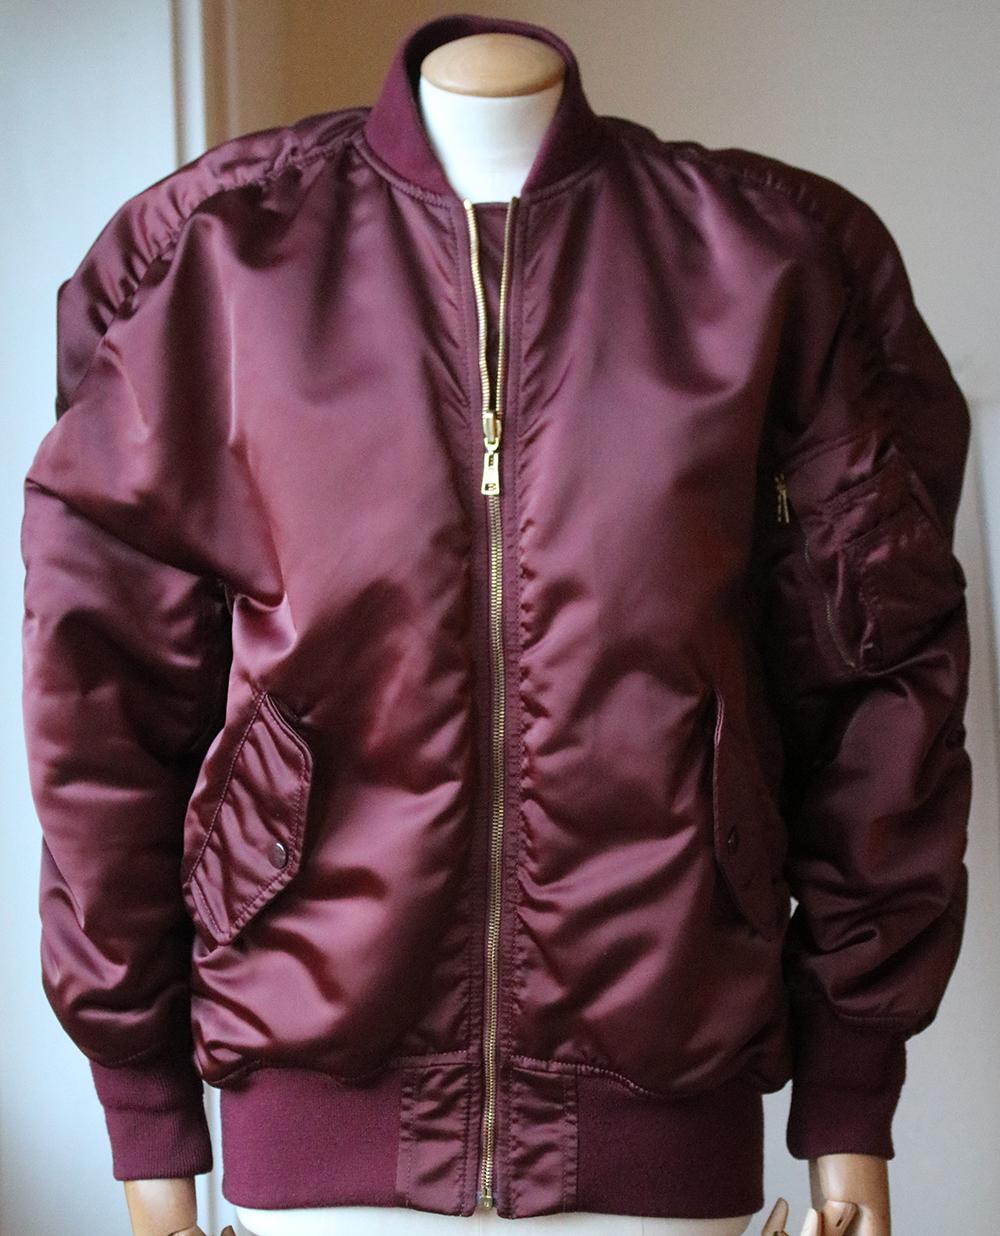 Balenciaga's reversible bomber jacket comes with two personalities: one side is chic and classic in burgundy, while the other packs statement punch with its bright orange hue. 100% polyamide. Filling: 95% polyester, 5% polyamide. Lining: 100% cupro.